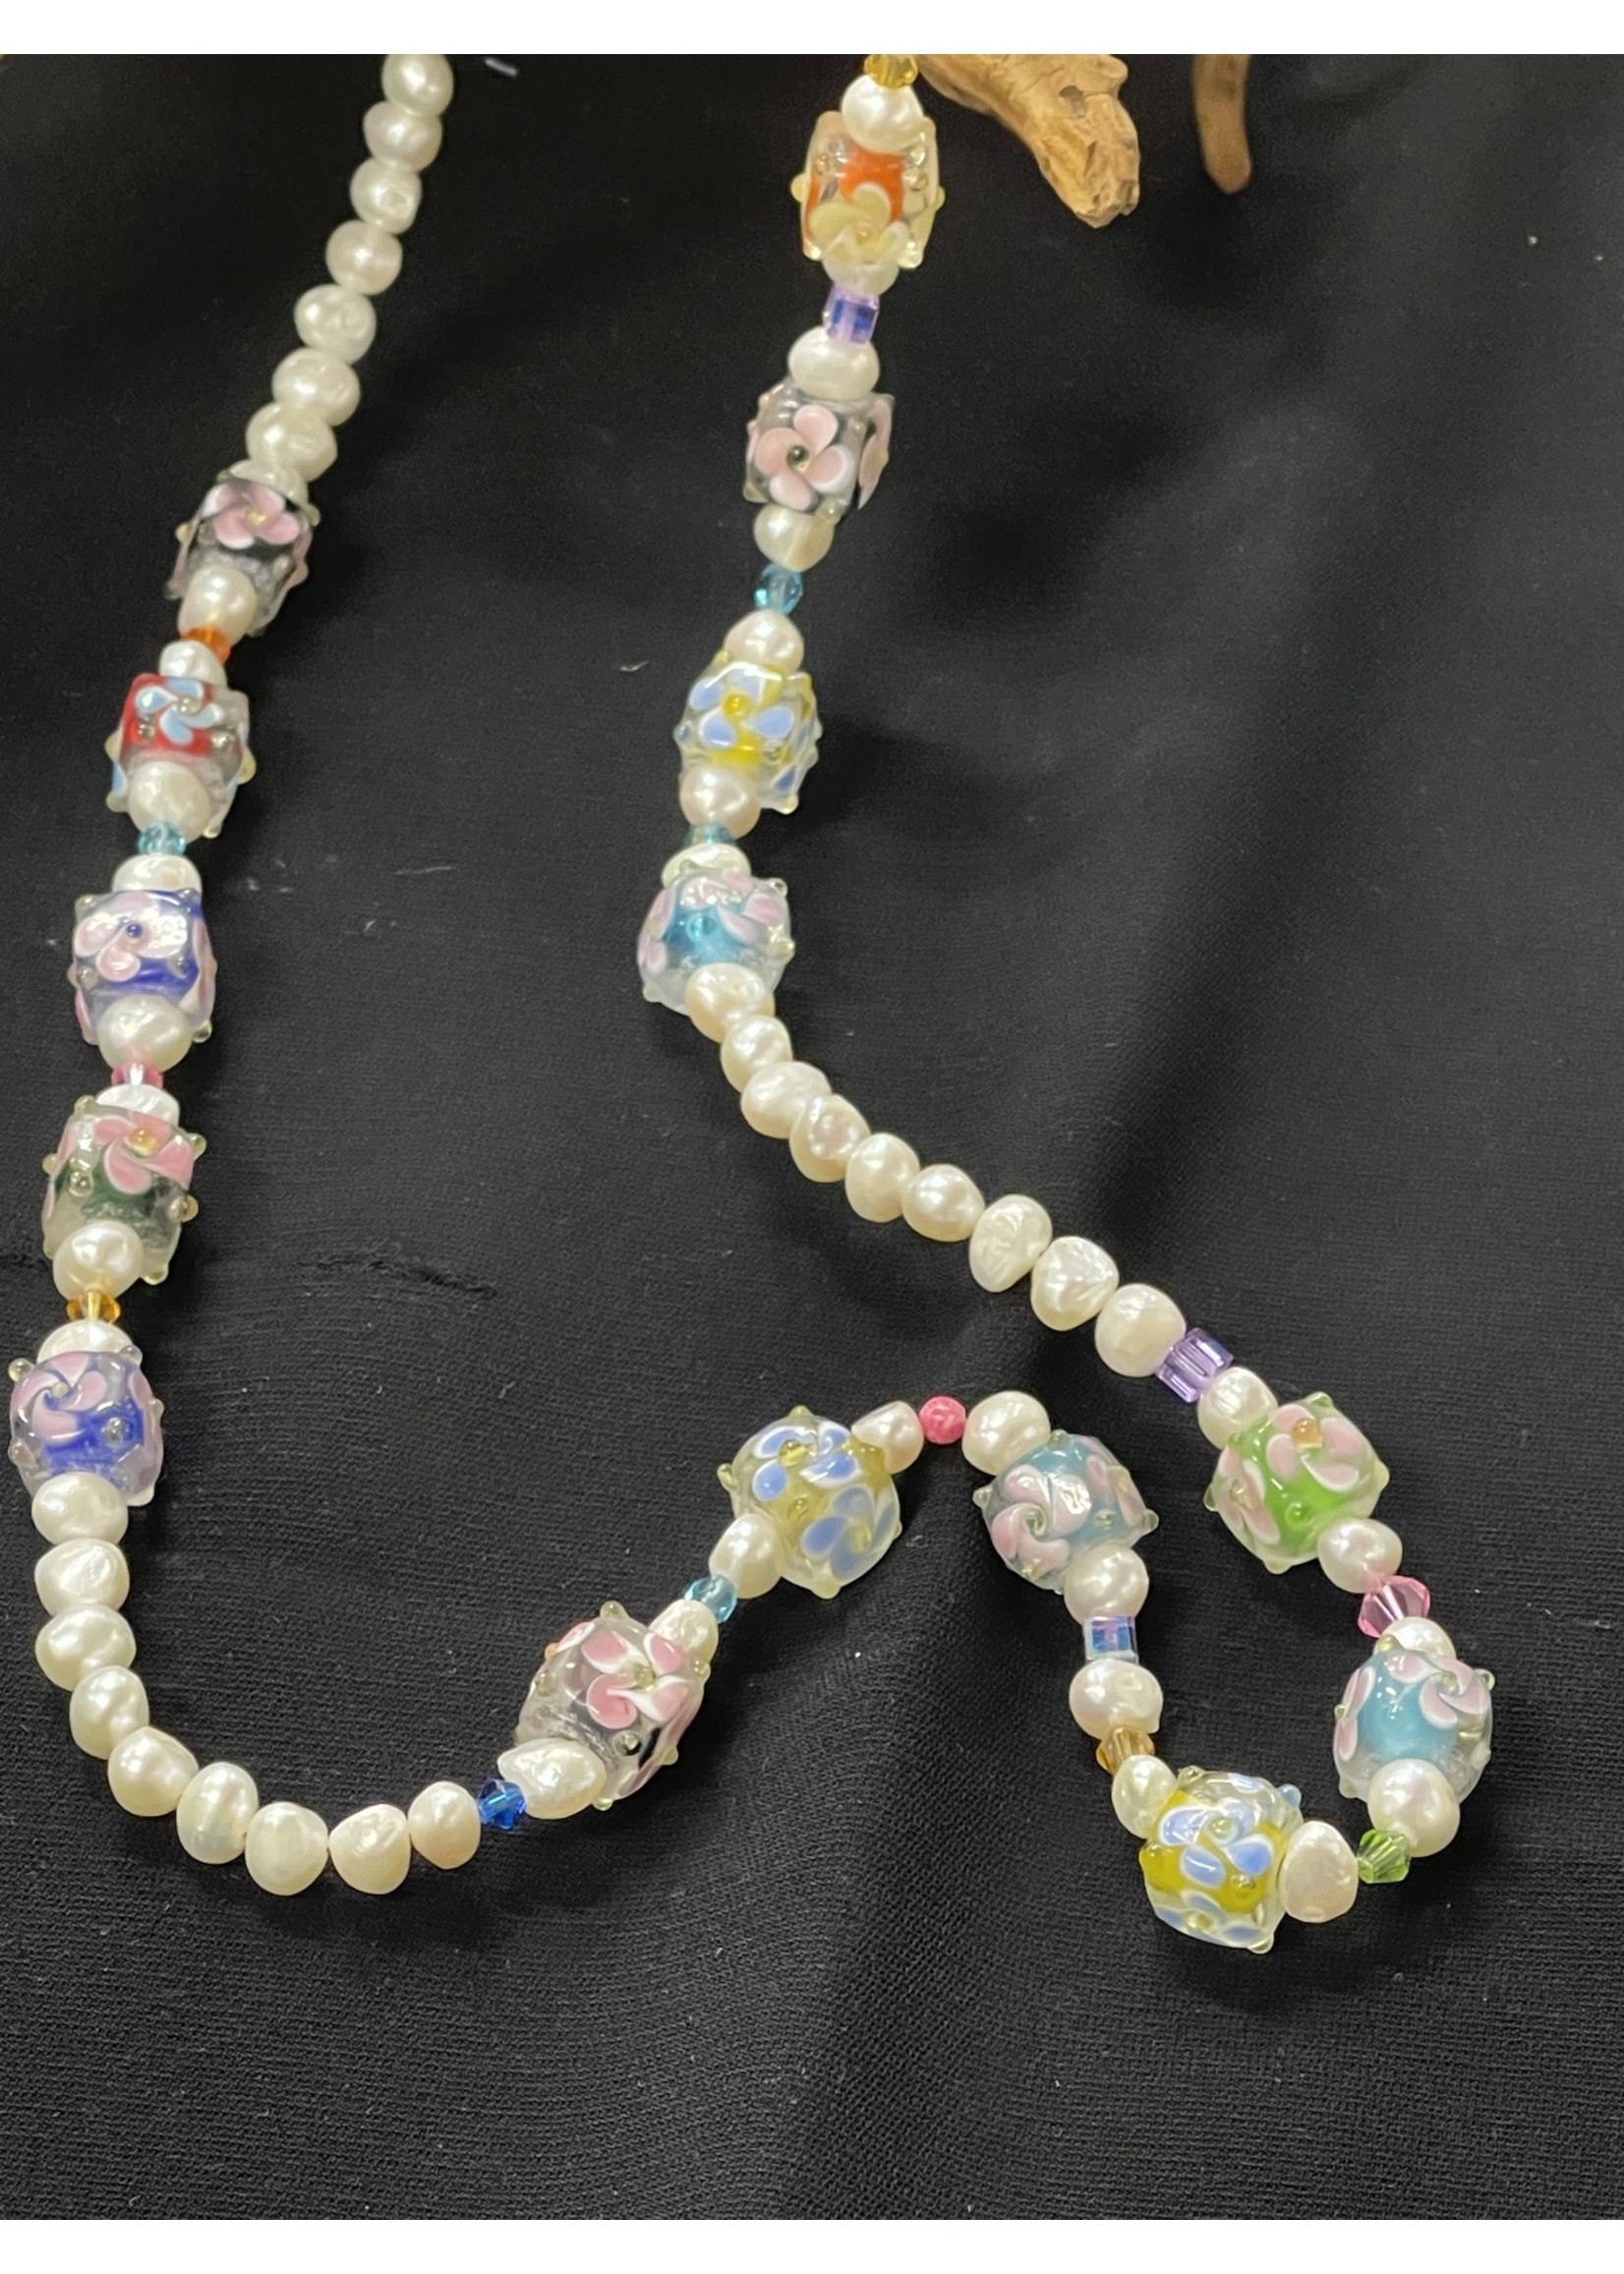 NECKLACE AC01-4736-22 White potato & Glass flowers Beads Necklace